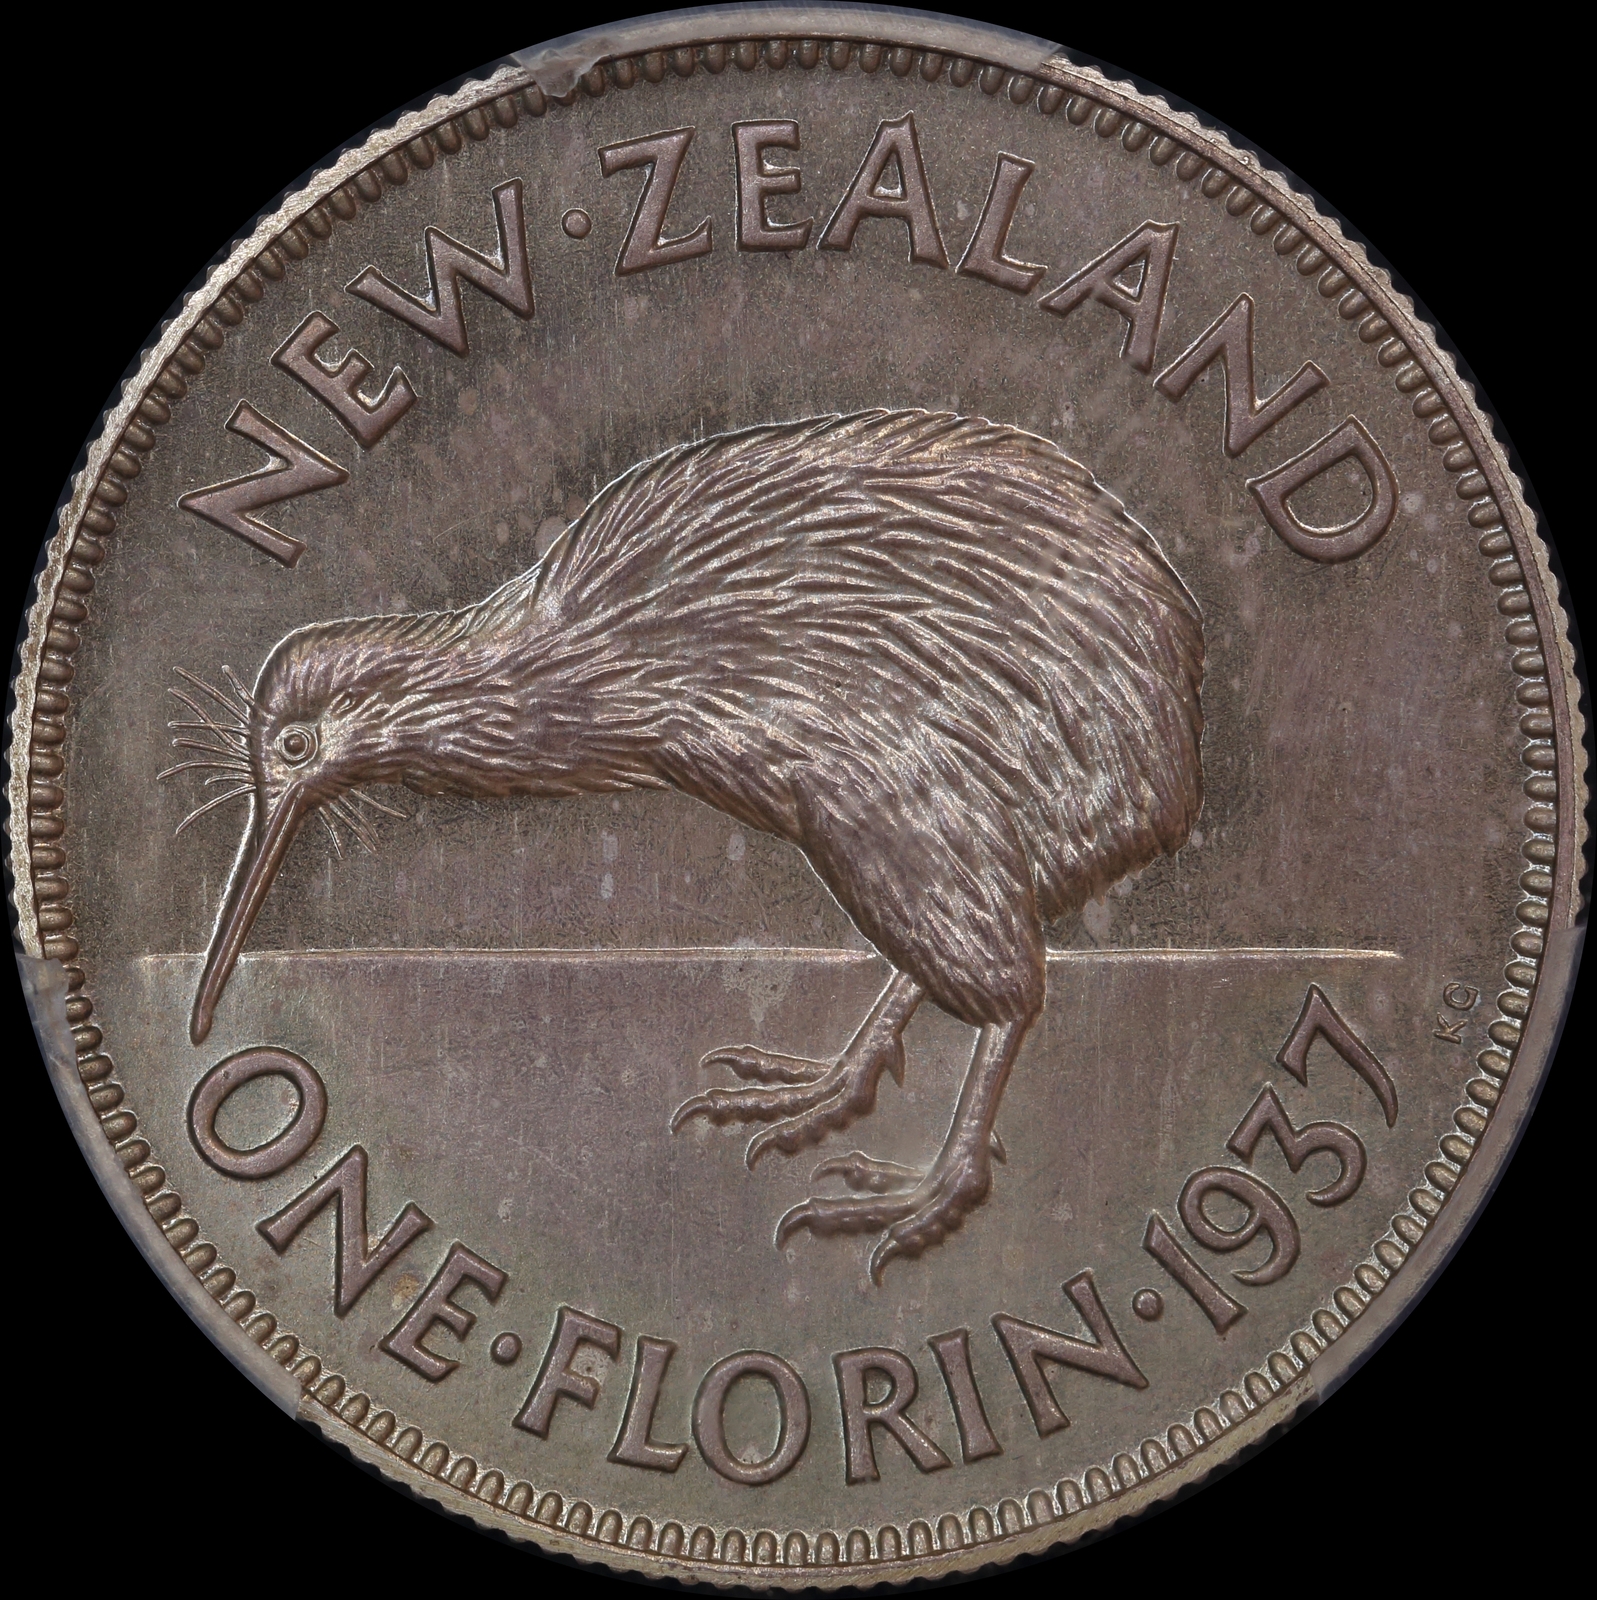 New Zealand 1937 Silver Uniface Pattern Florin KM# cf 10.1 PCGS SP65 product image